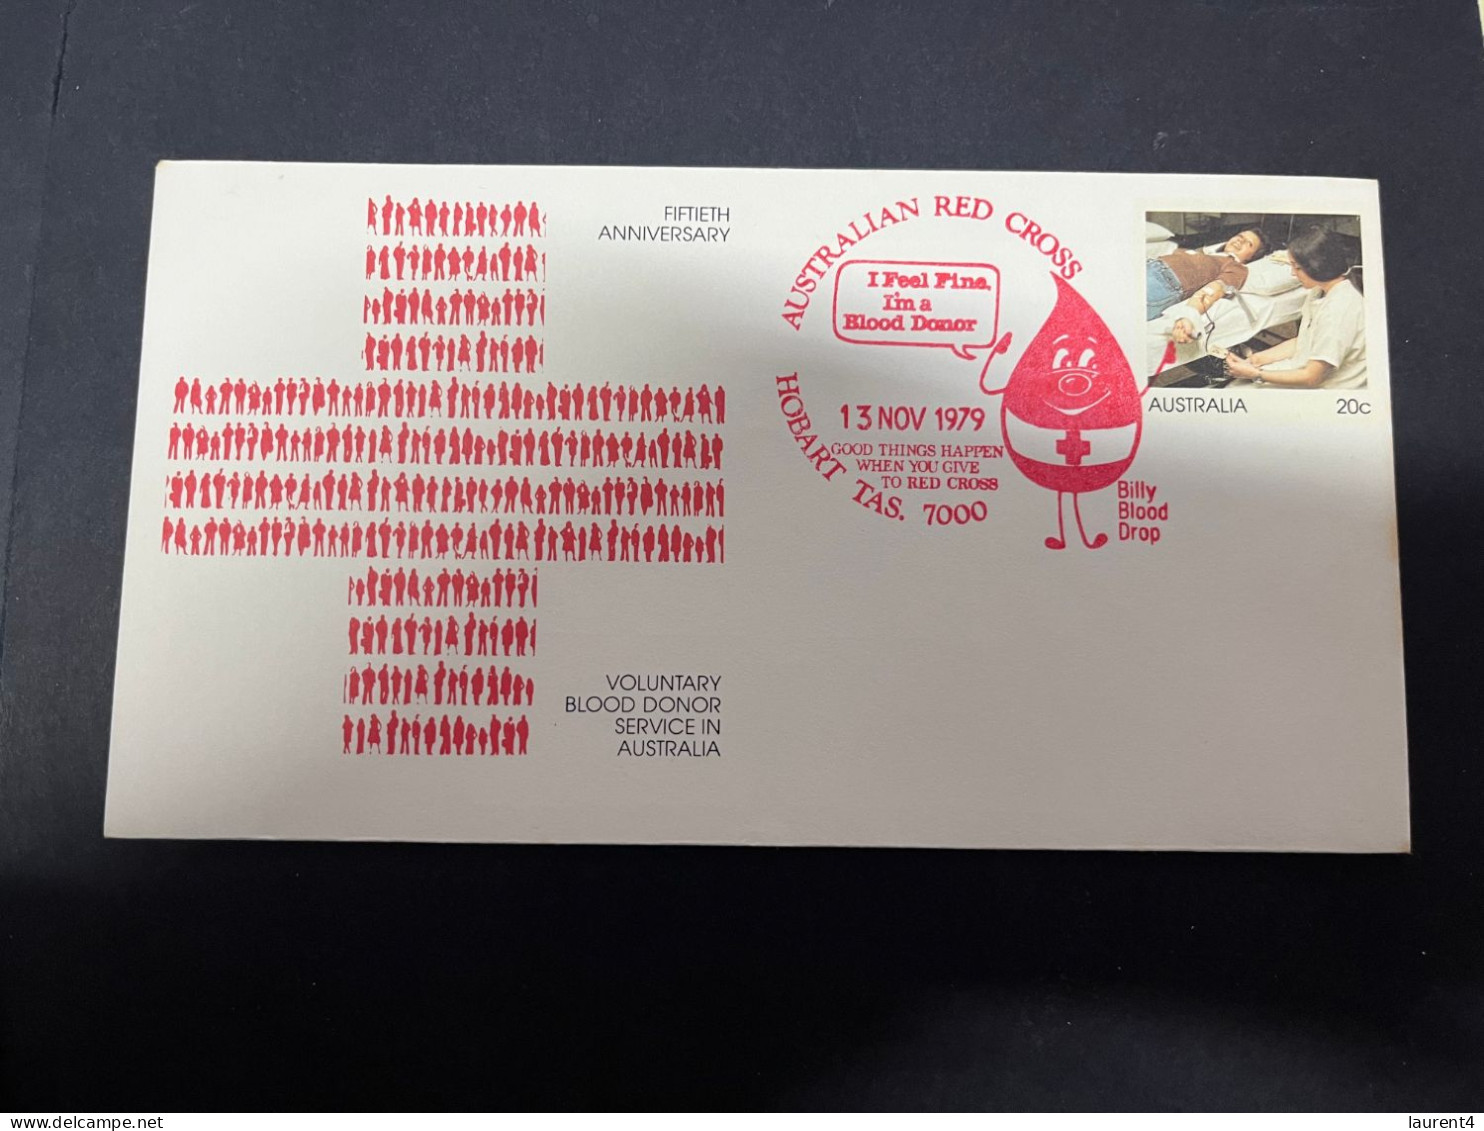 21-4-2024 (2 Z 39) Australia FDC Cover - 1982 - Blood Donors (red Cover) (Red Cross) - Premiers Jours (FDC)